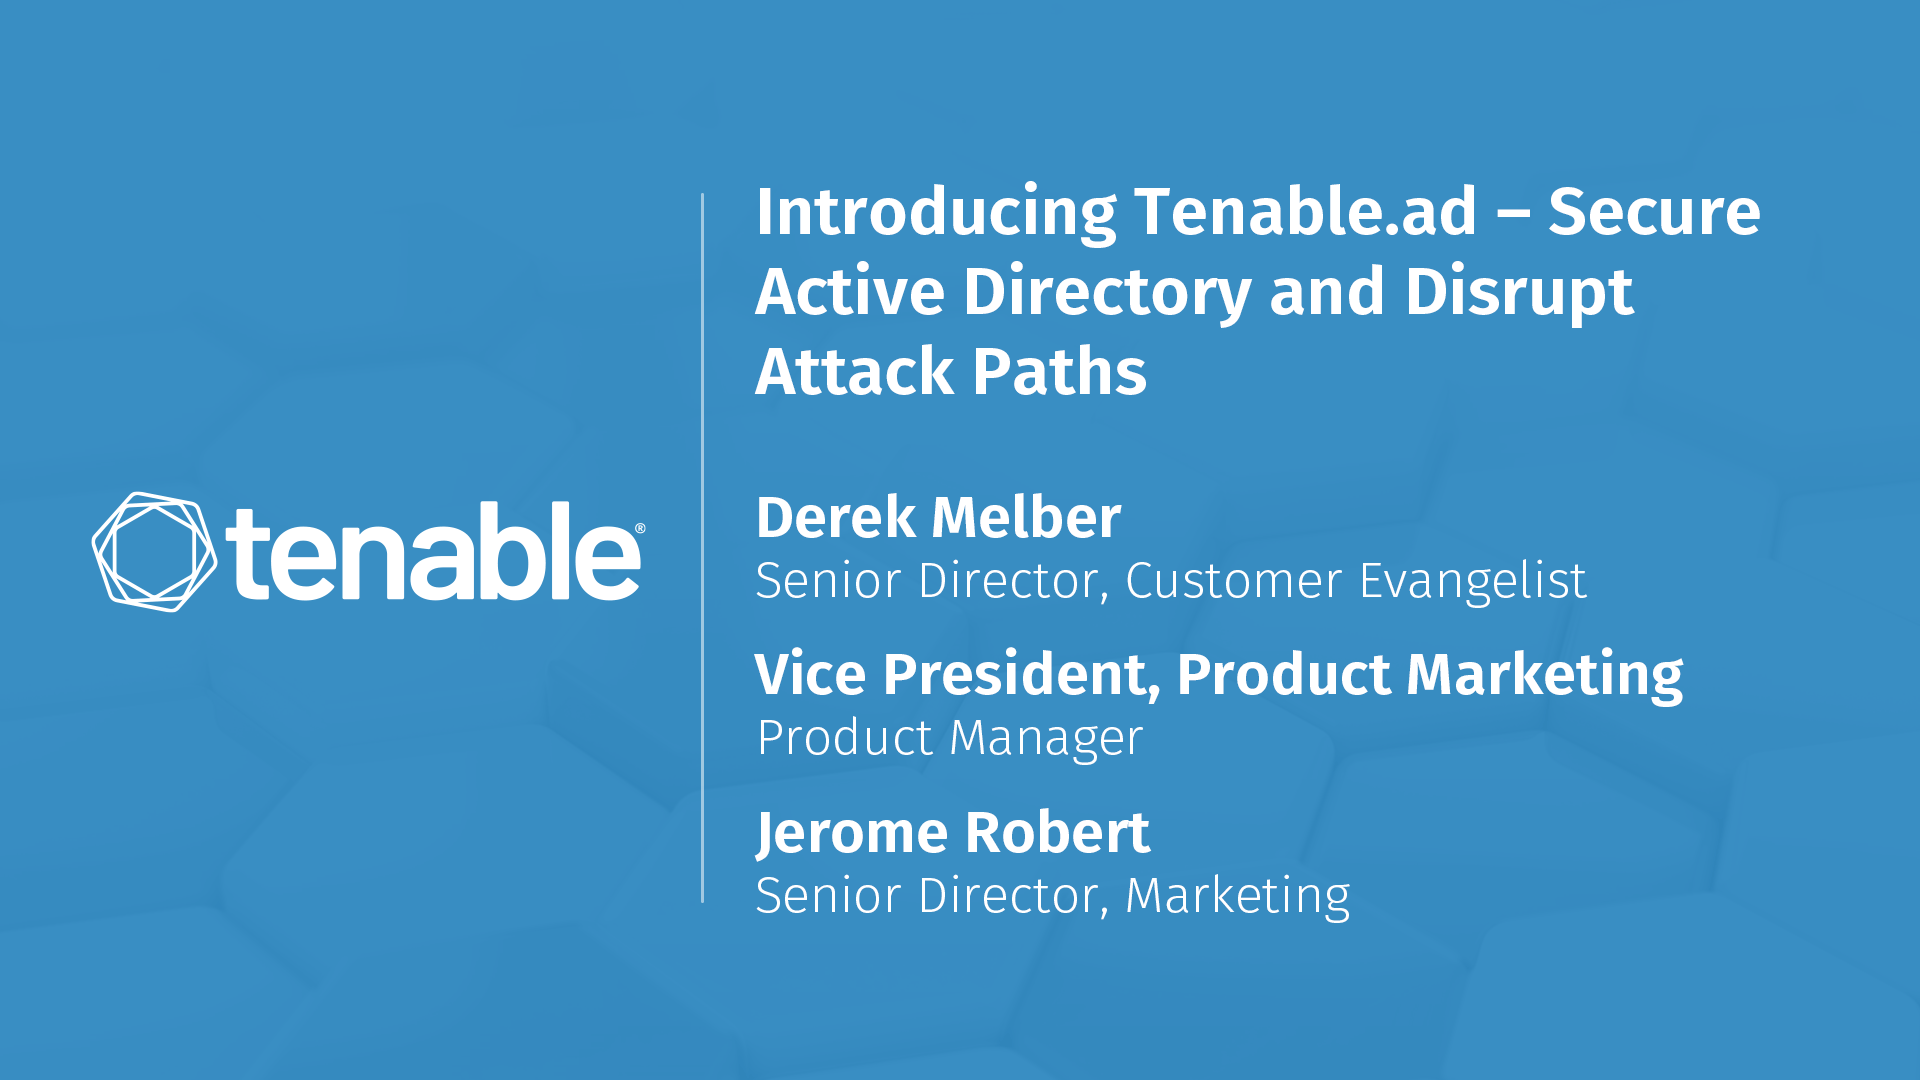 Introducing Tenable.ad: Secure Active Directory and Disrupt Attack Paths